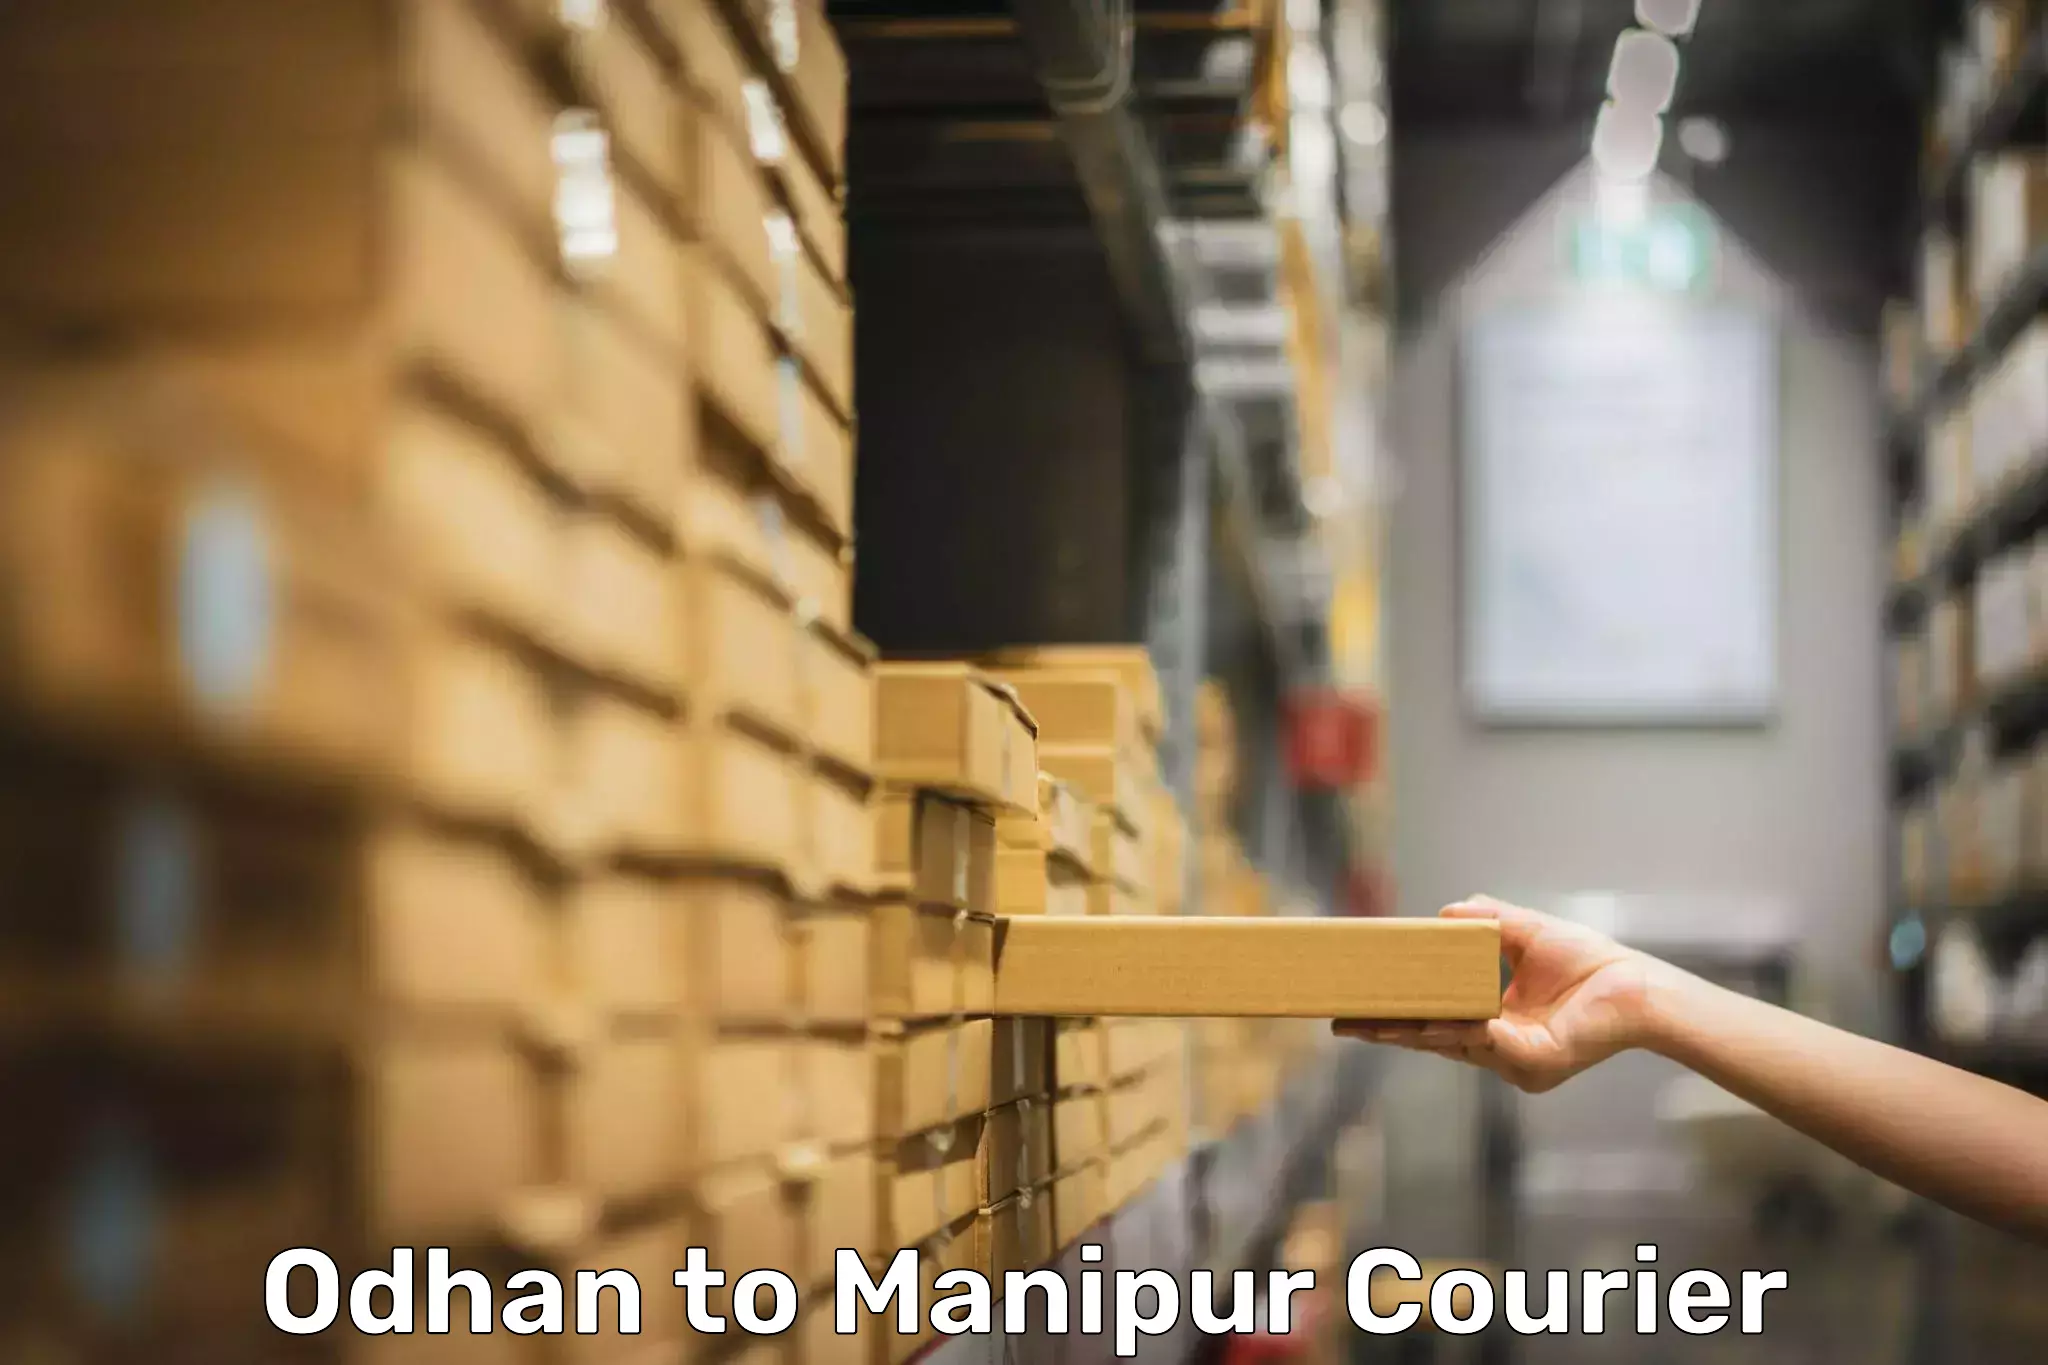 Luggage shipment specialists Odhan to Manipur